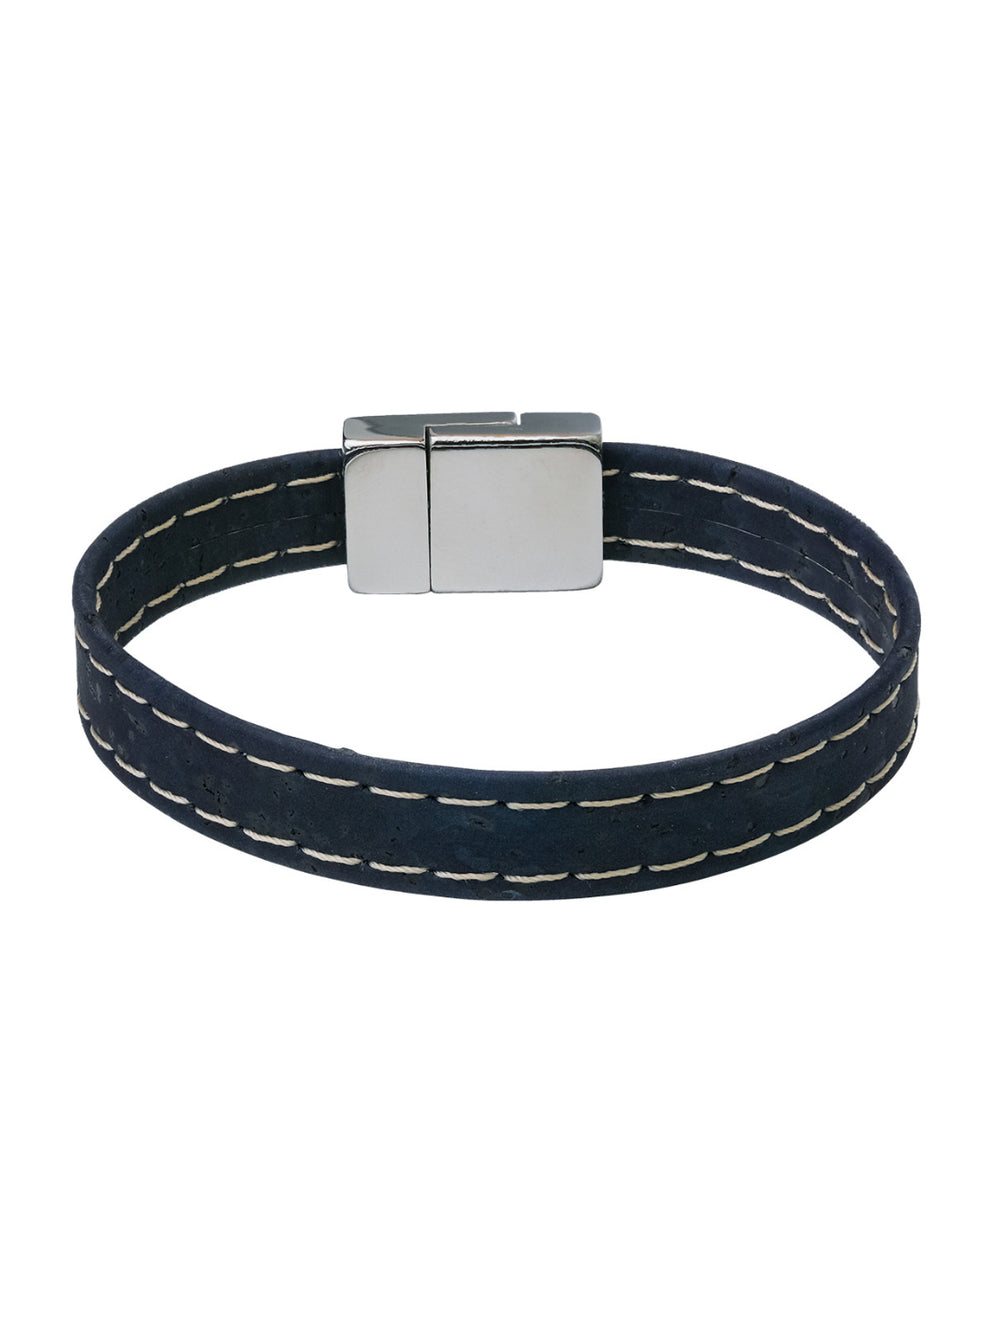 Introducing Maritime Elegance Embroidered Cork Bracelet: Navy-blue sophistication meets modern design. Lightweight, magnetic clasp, and elegantly packaged for any occasion.